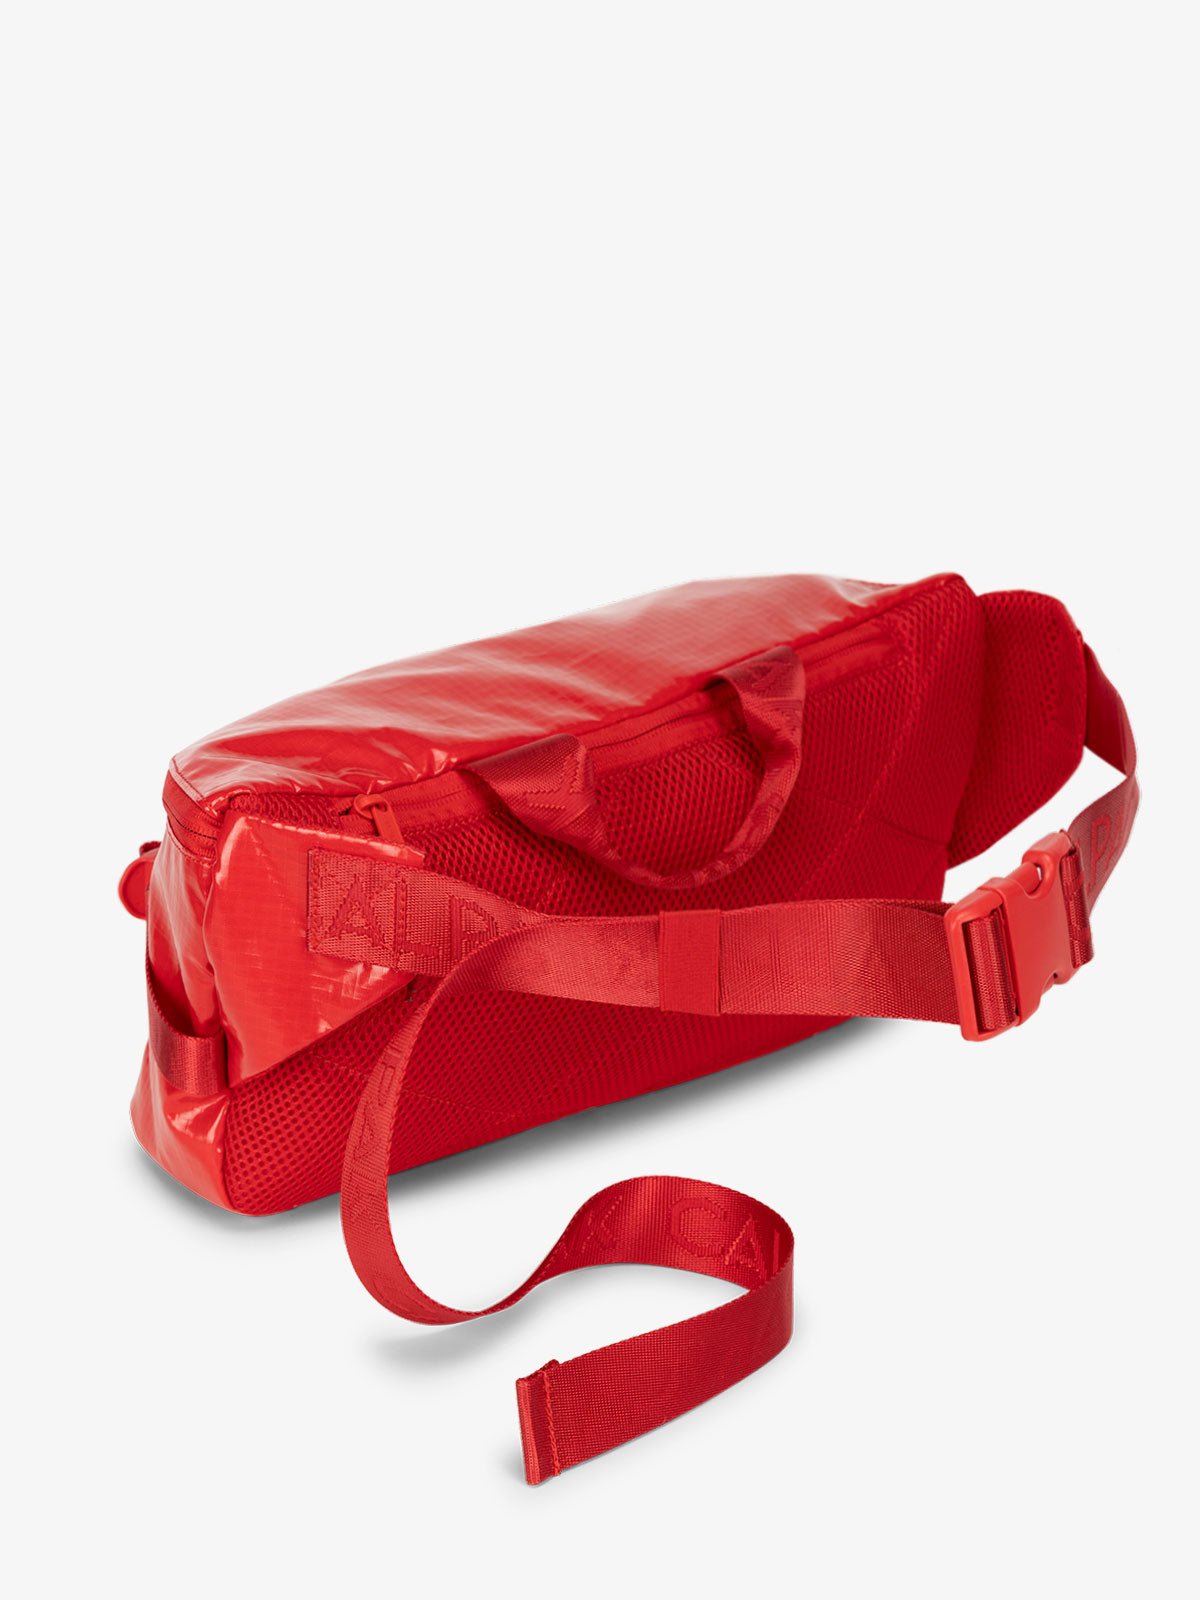 CALPAK Terra Sling Bag for women with adjustable crossbody strap and top handle in flaming red